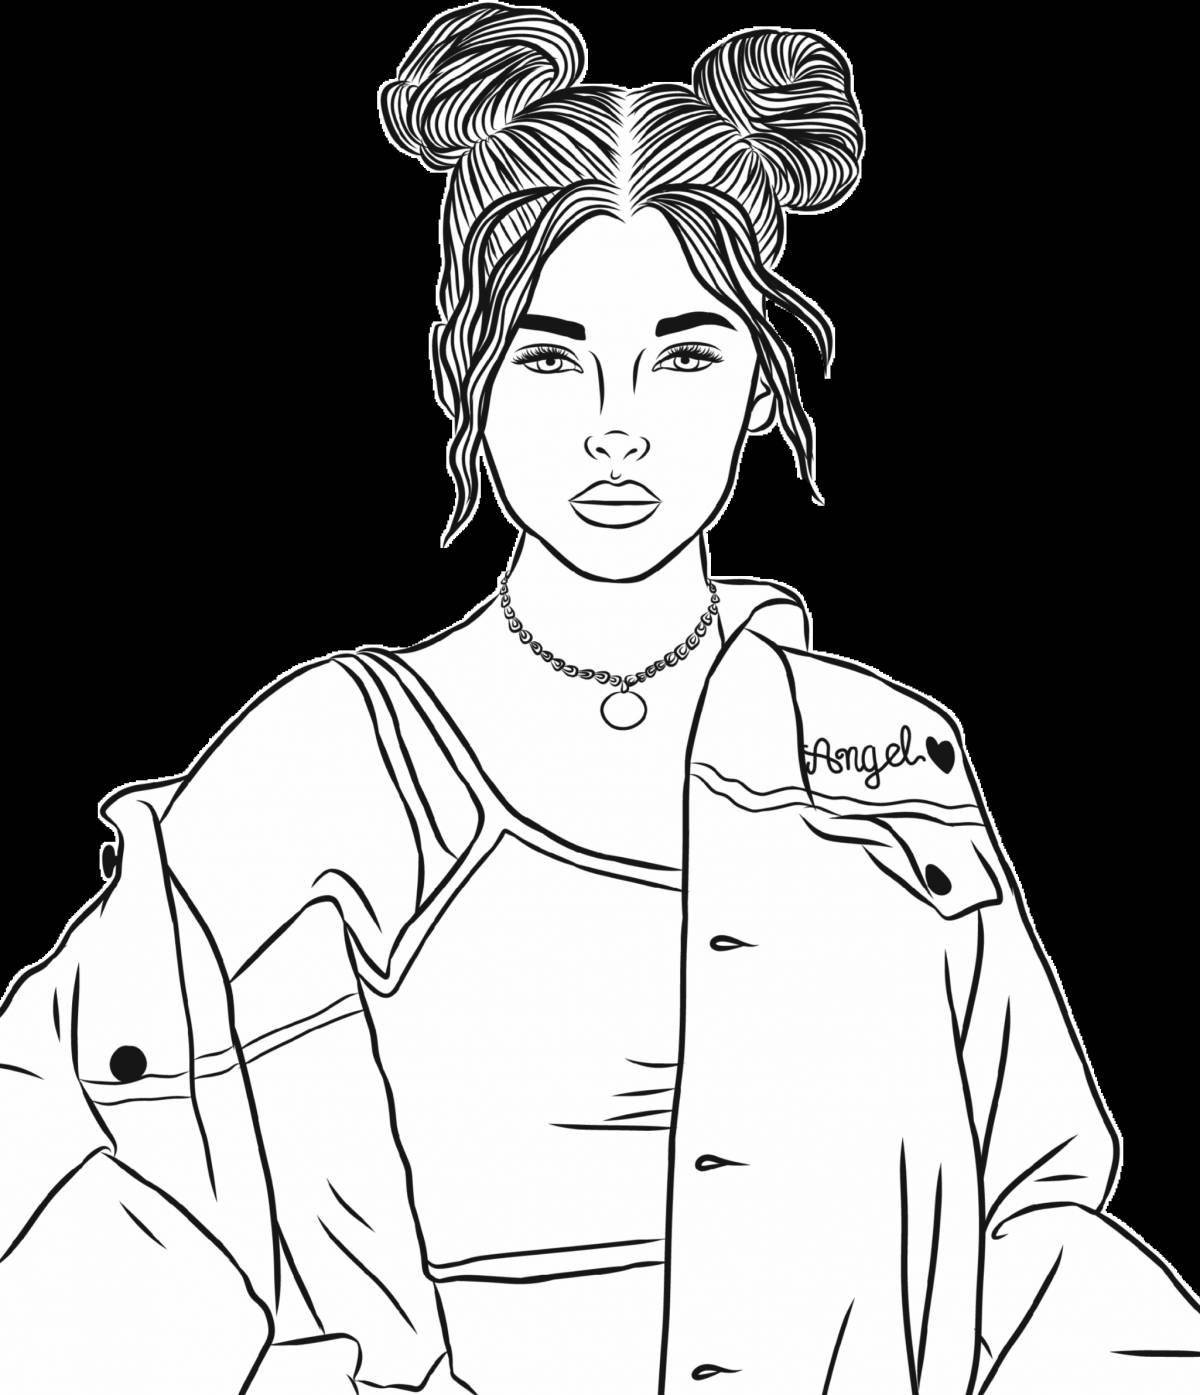 Exciting tomboys 7 coloring pages